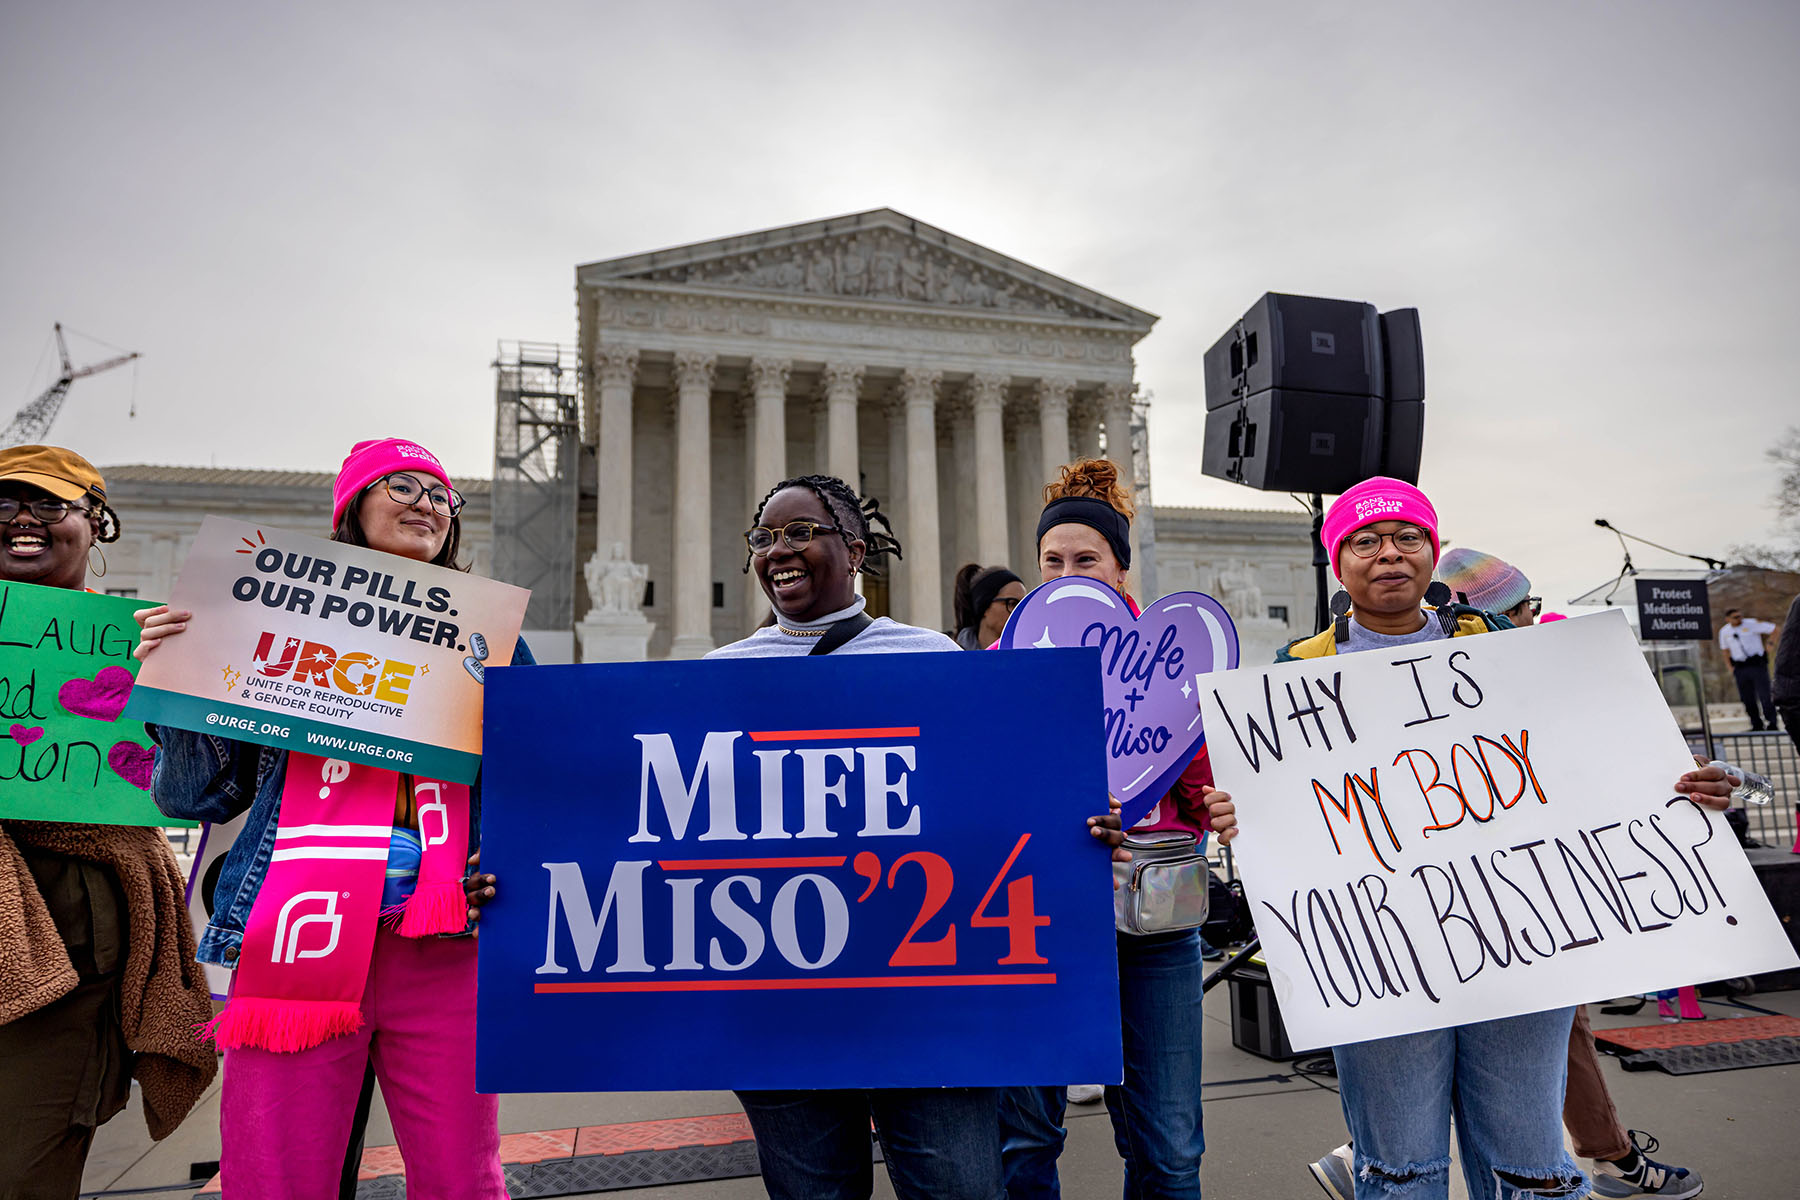 Demonstrators hold signs that read "Mife Miso 2024," "our pills, our power" and "why is my body your business" are seen outside the Supreme Court.